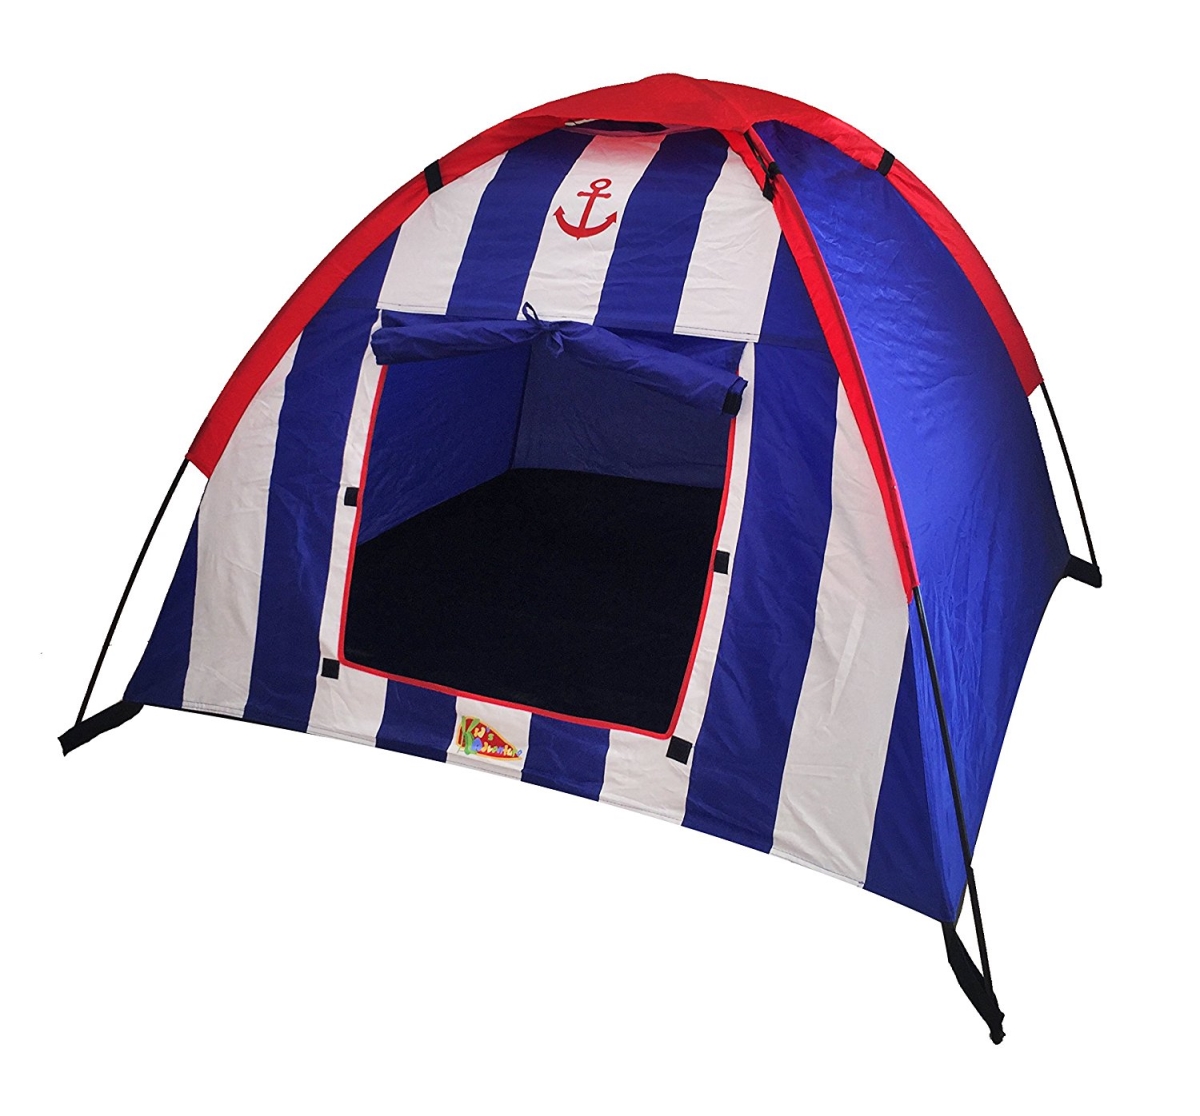 00232-7 34 X 48 X 48 In. Striped Dome Tent - Blue, Red & White